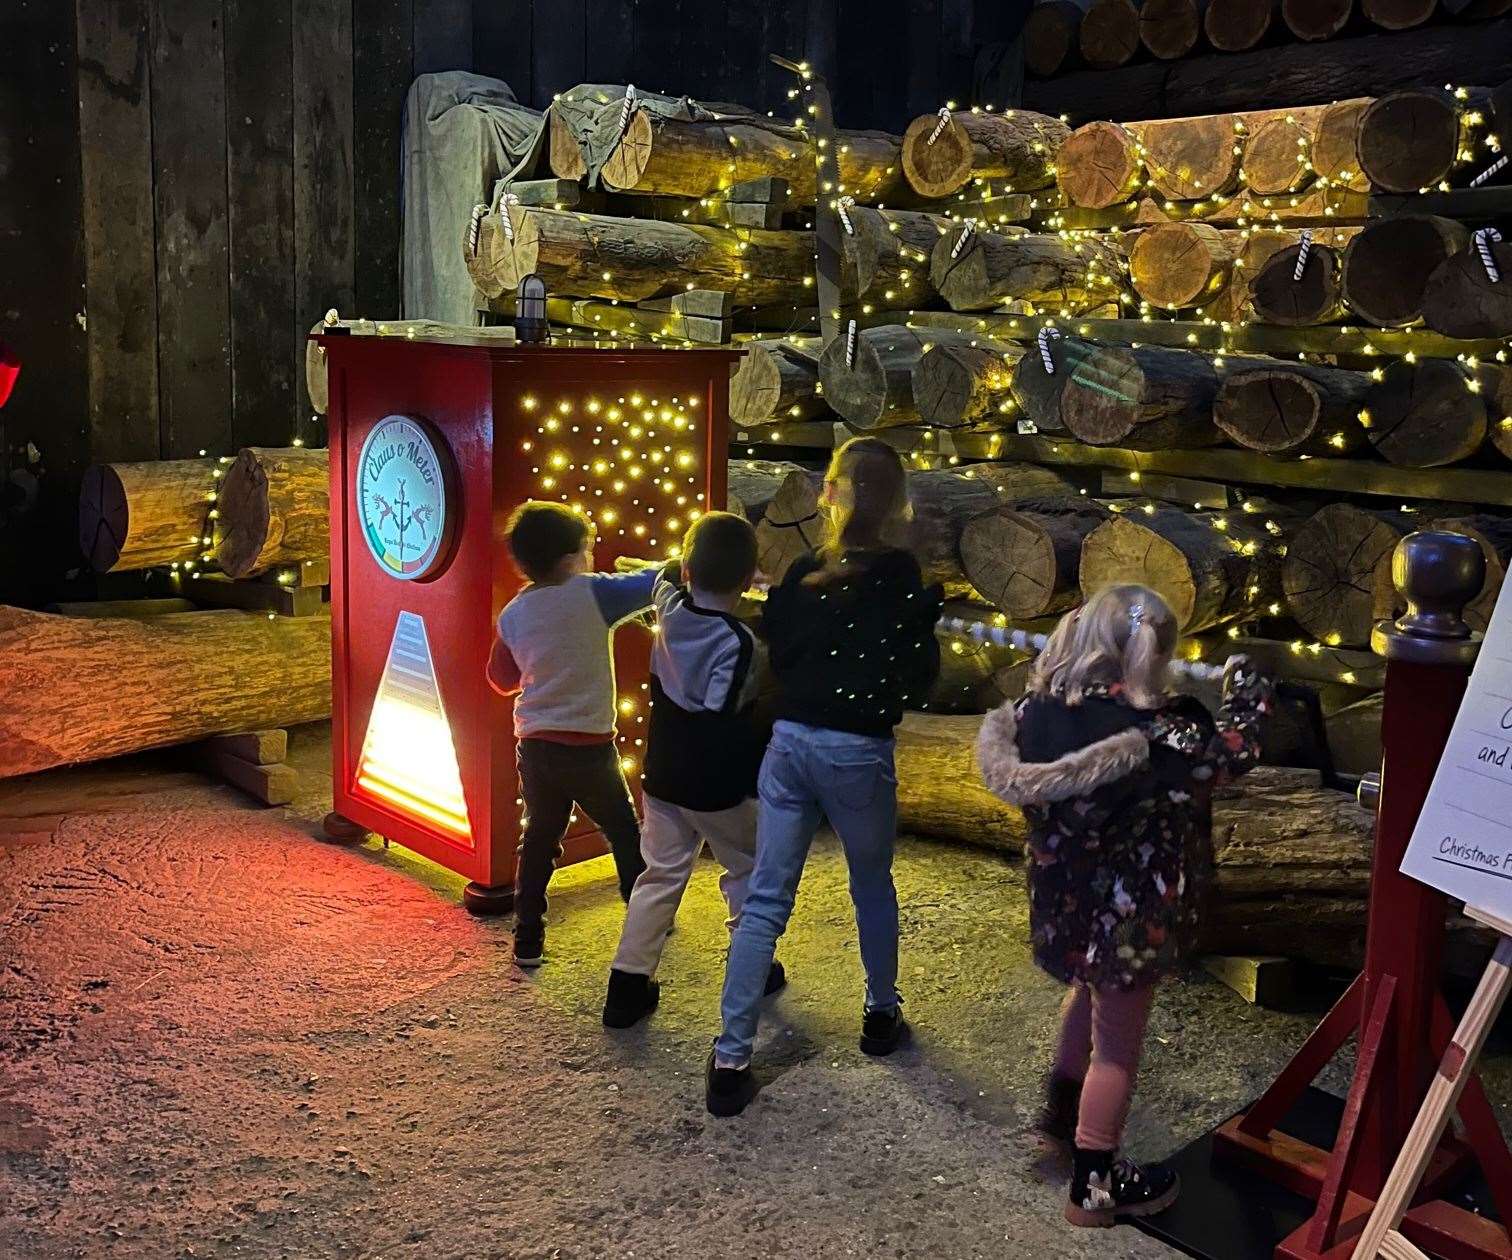 Children turn a wheel to produce Christmas spirit and power up the Claus-o-meter